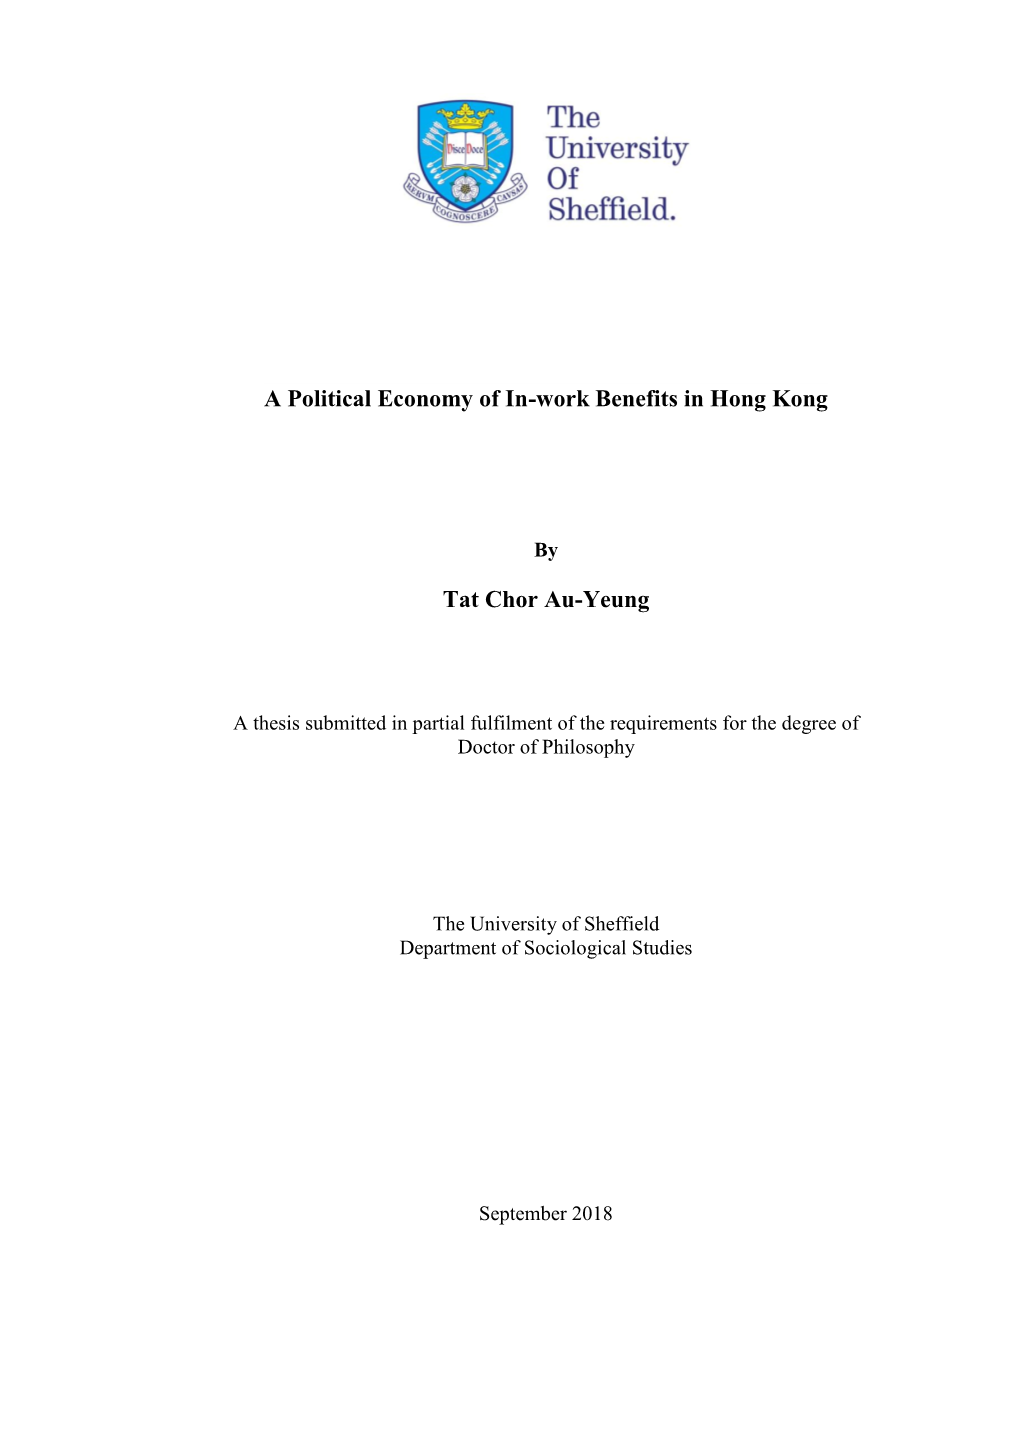 A Political Economy of In-Work Benefits in Hong Kong